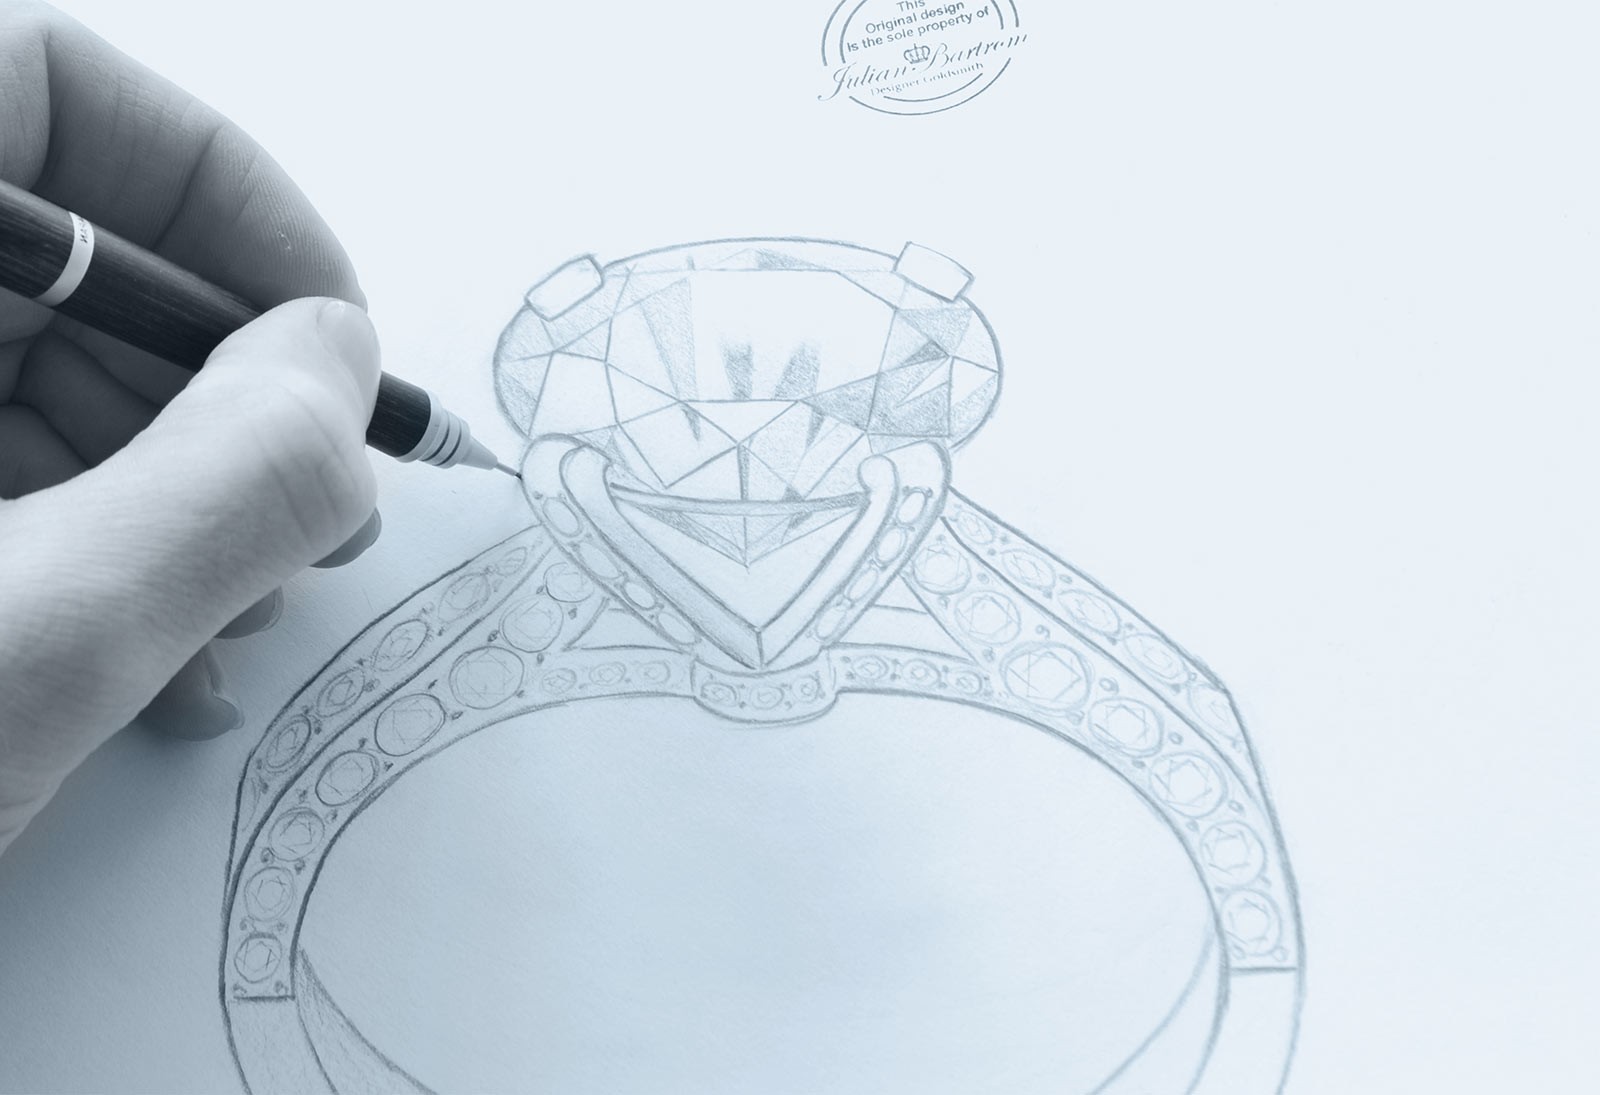 2, Develop the vision. 2ct diamond ring and custom jewellery design with jewellery expert Julian Bartrom.